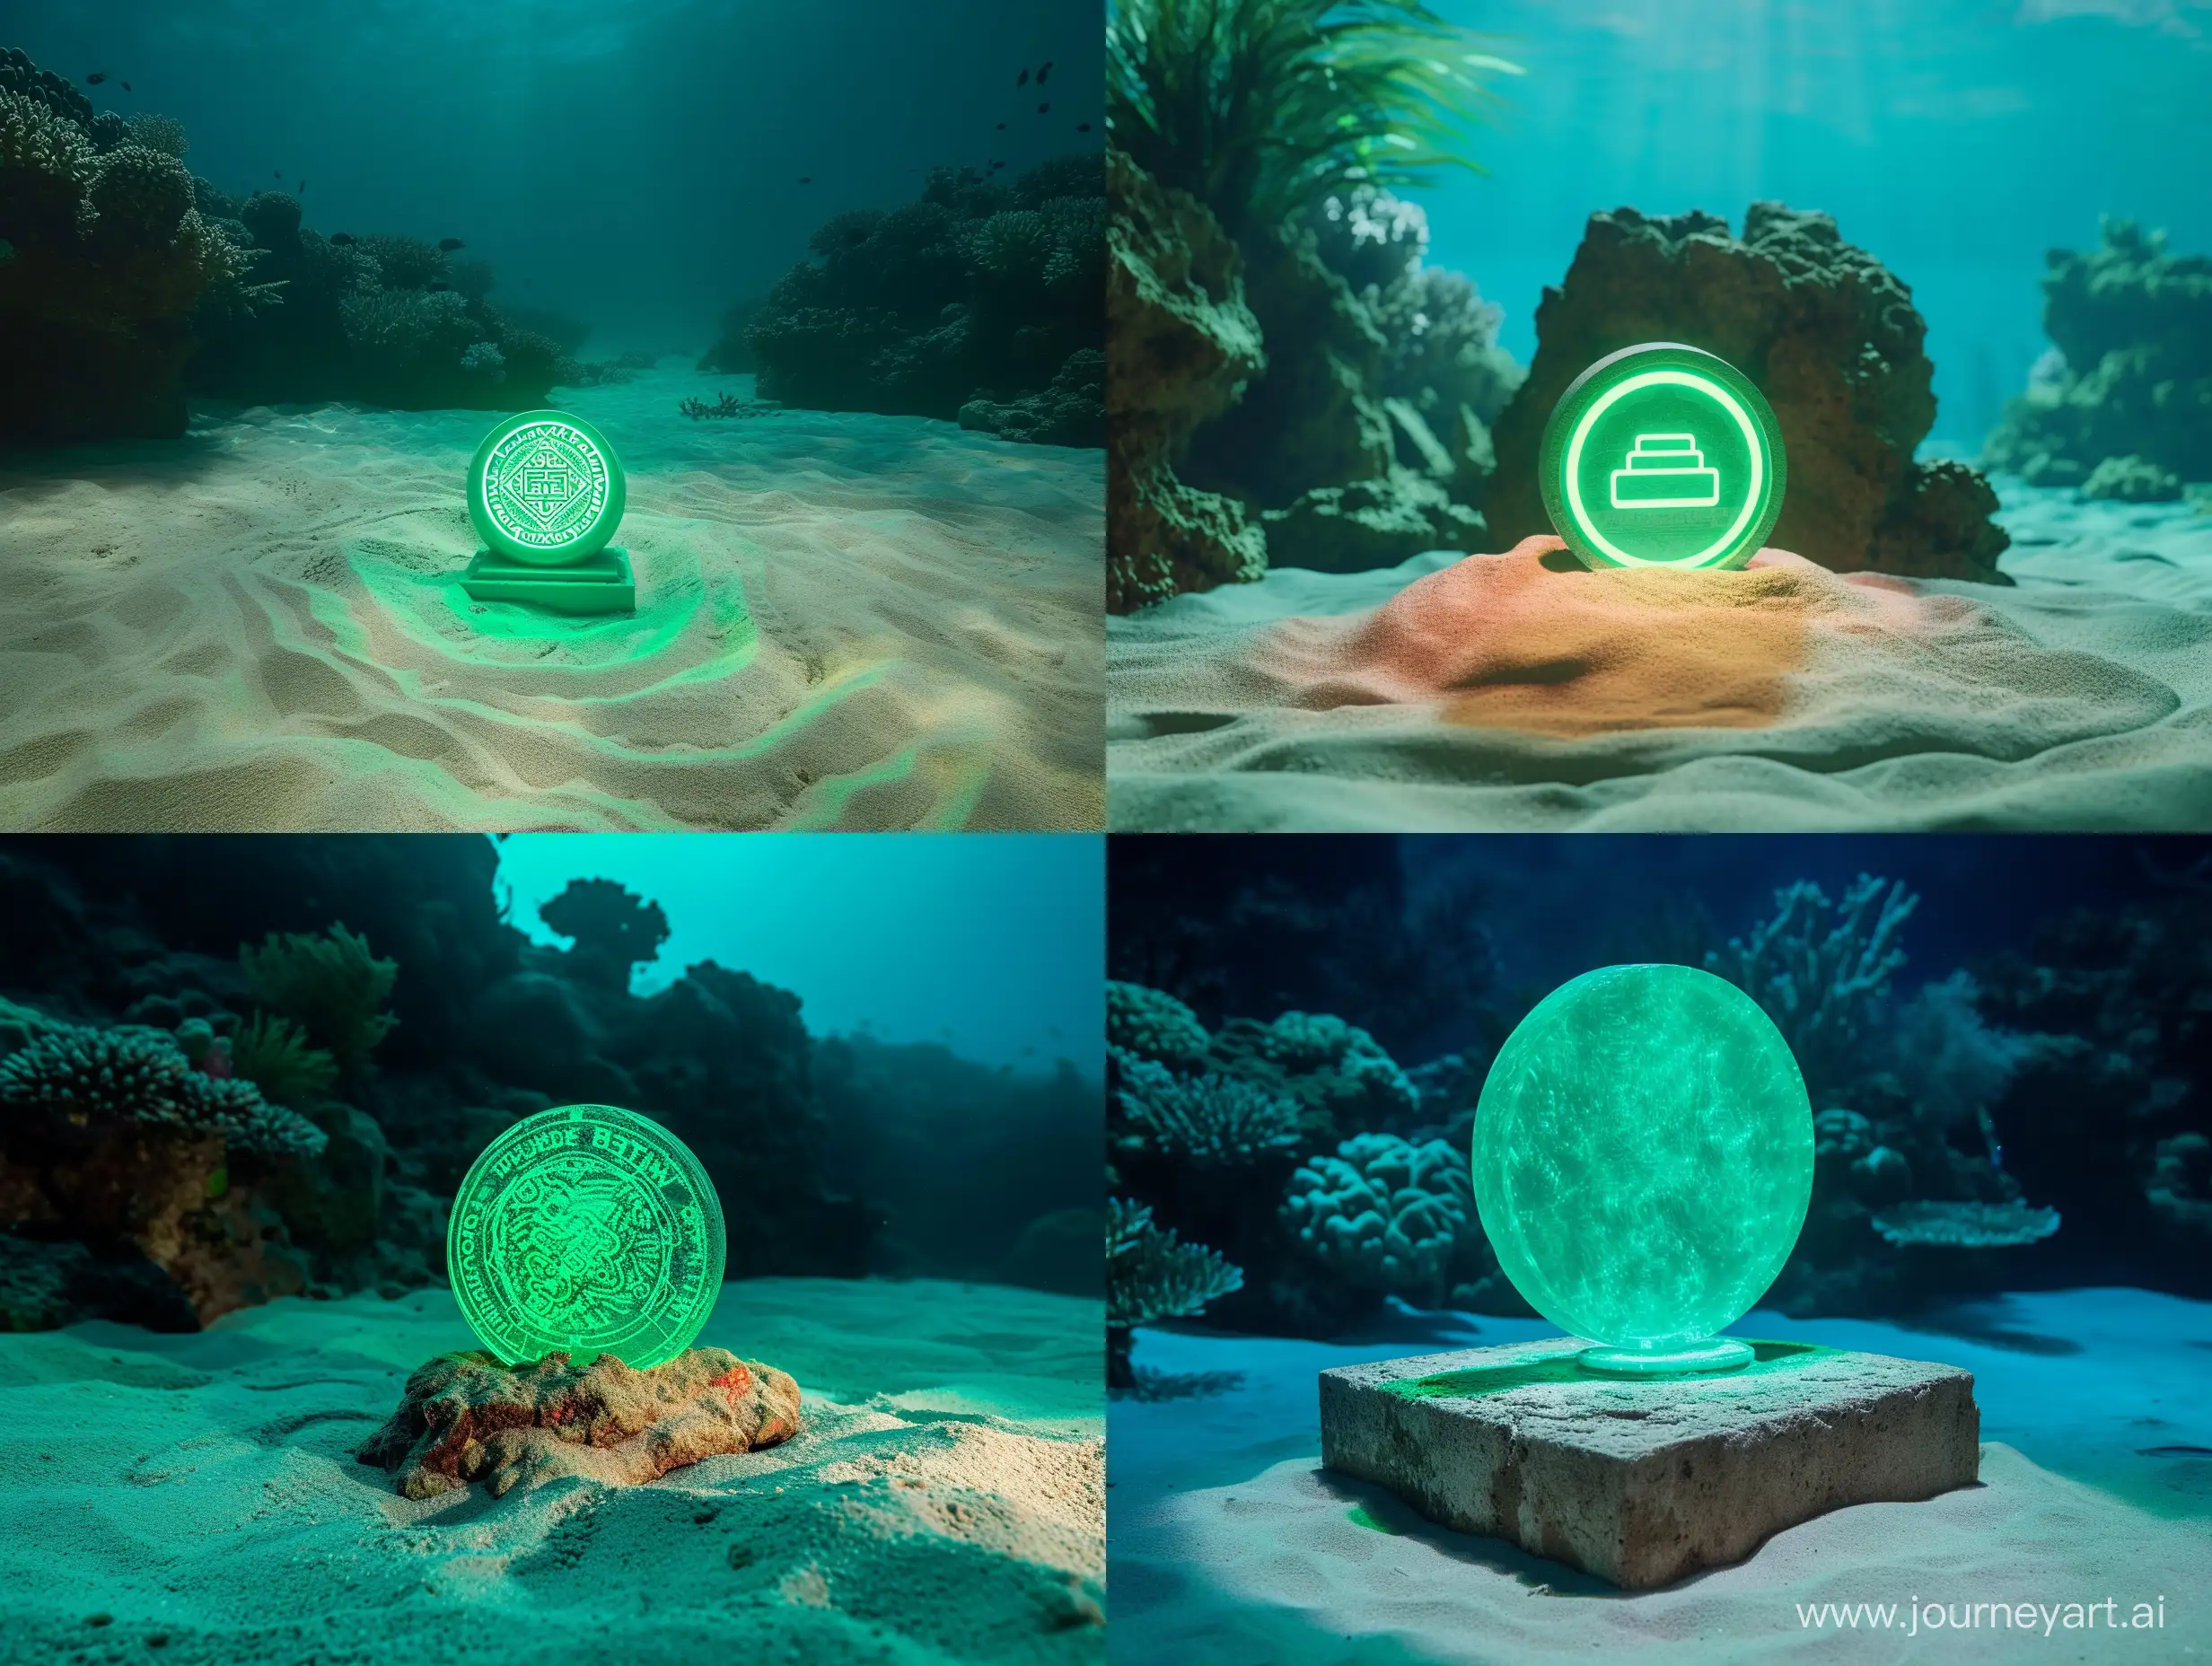 Luminous-Green-Logo-Monument-Underwater-with-Coral-Reef-Background